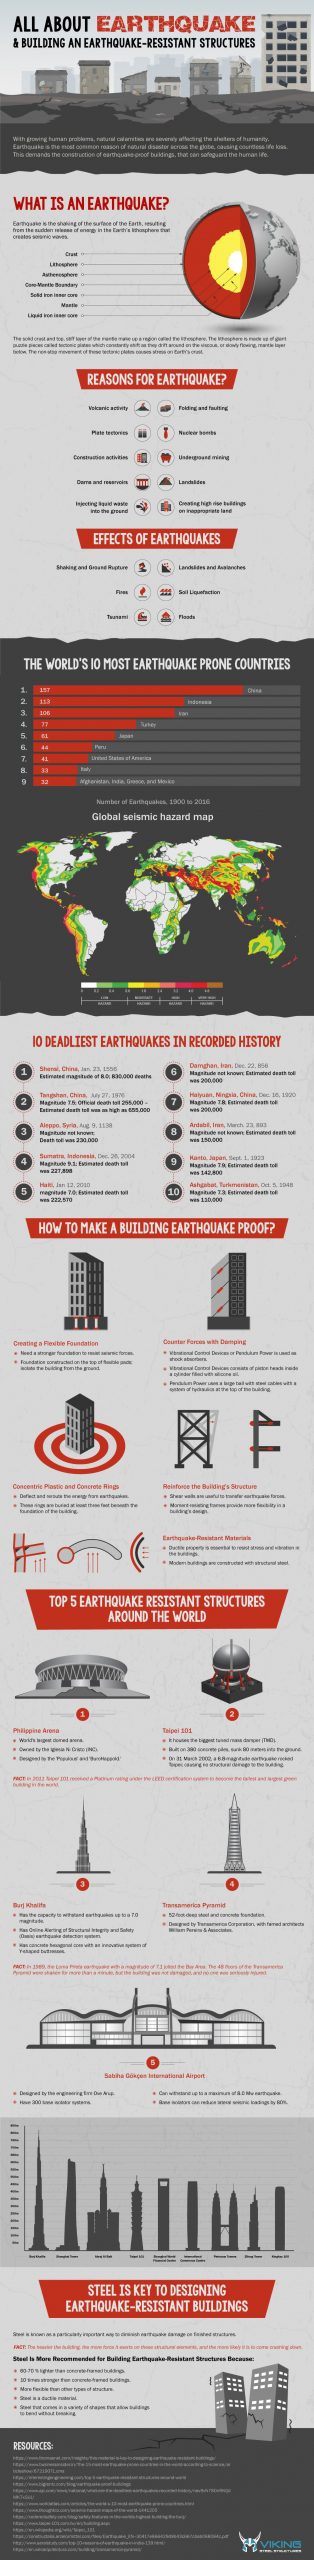 All About Earthquake & Building an Earthquake-Resistant Structures